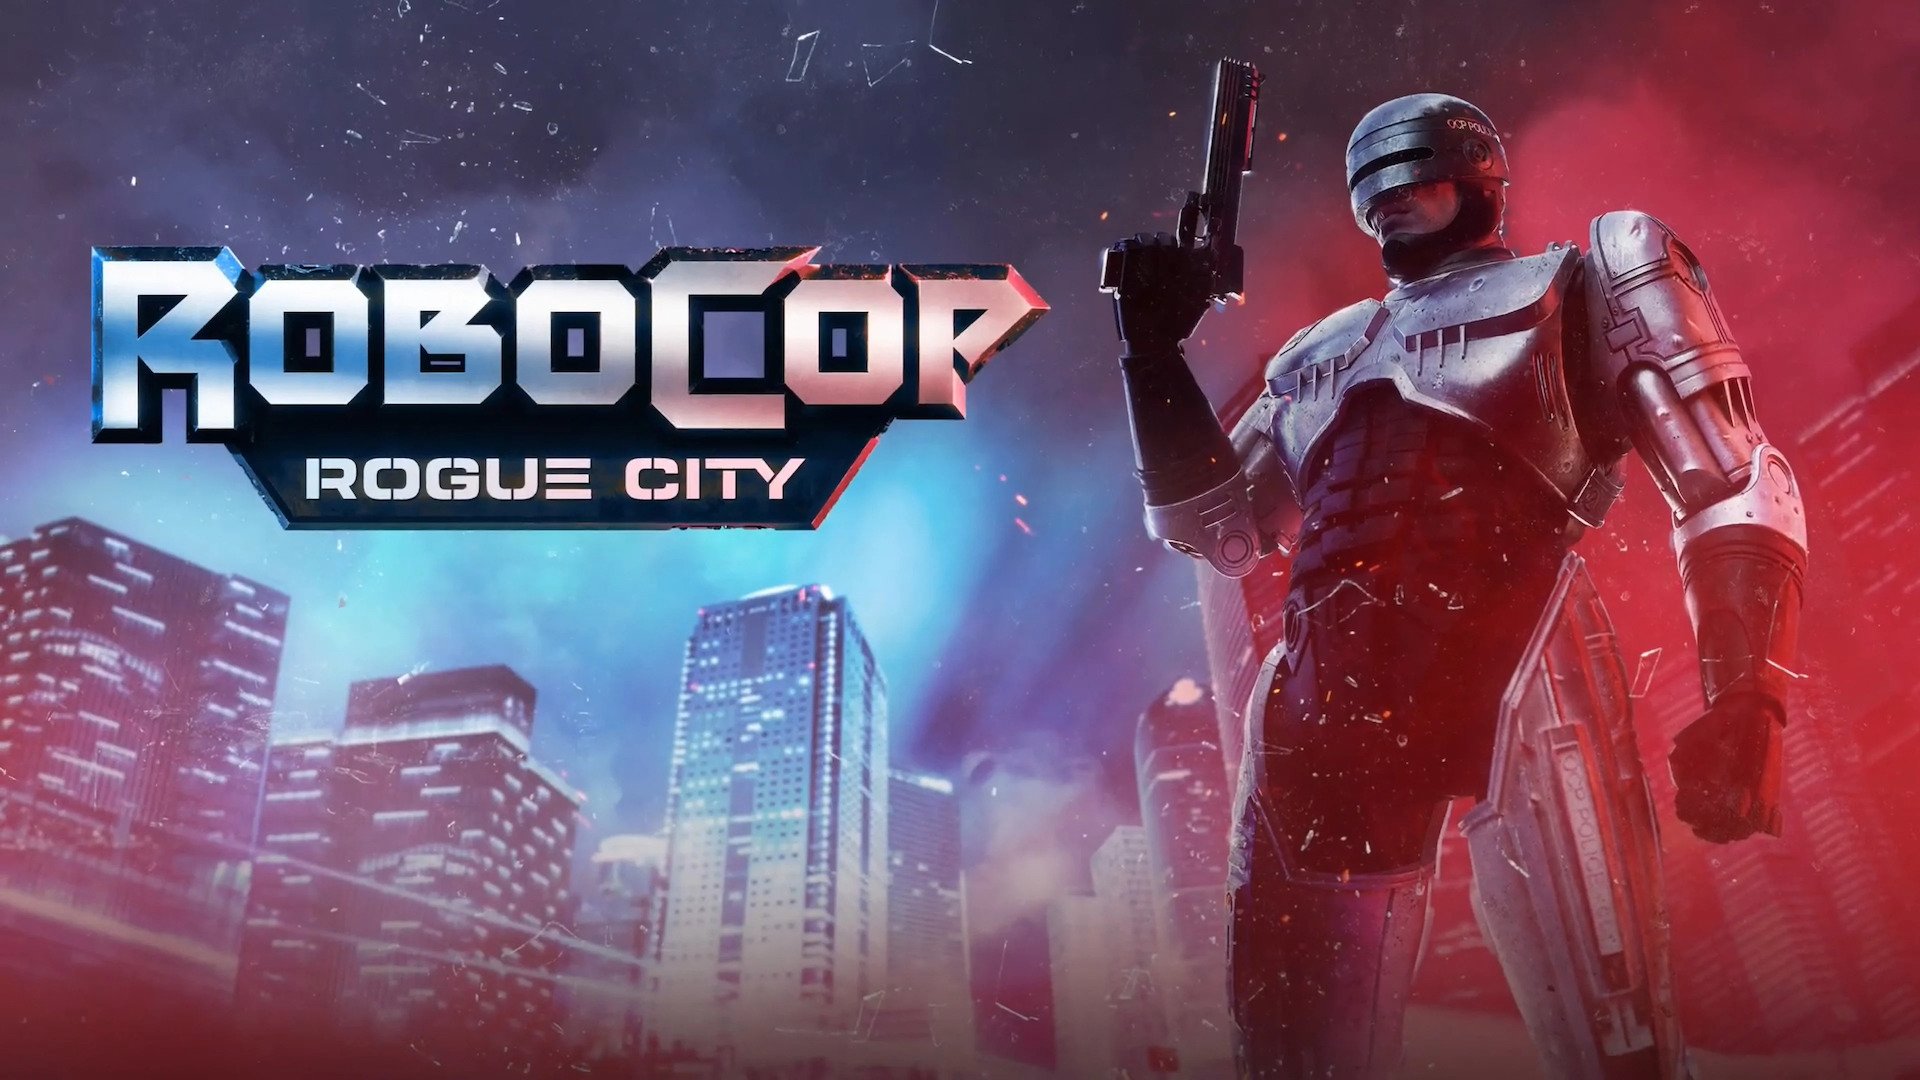 A RoboCop character holding a gun and tall buildings in the background with RoboCop Rouge City as the title.